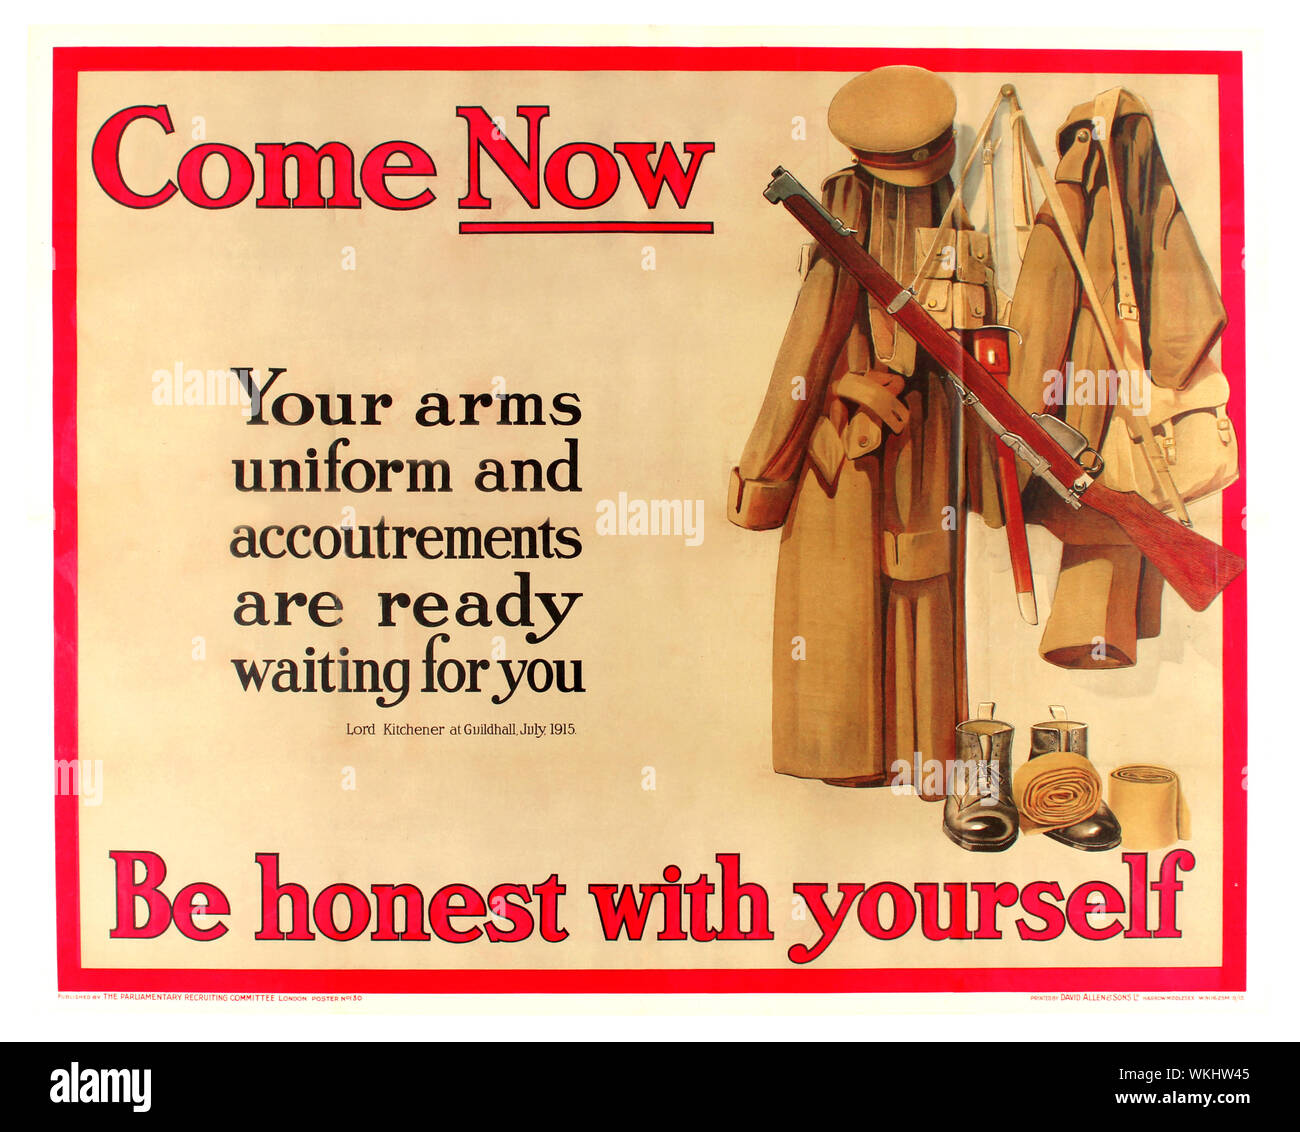 Vintage World War One WWI Propaganda Poster - Come Now Be Honest With Yourself, with a Quote from Lord Kitchener speaking at Guildhall on 9 July 1915 reading 'Your arms, uniform and accoutrements are ready waiting for you' . Illustration of weapons and uniform appear next to the quote. British Army Recruitment Poster - Published by the parliamentary recruiting committee. Printed by David Allen and Sons Harrow, Middlesex. UK 1915,  British WW1 Propaganda Poster Stock Photo